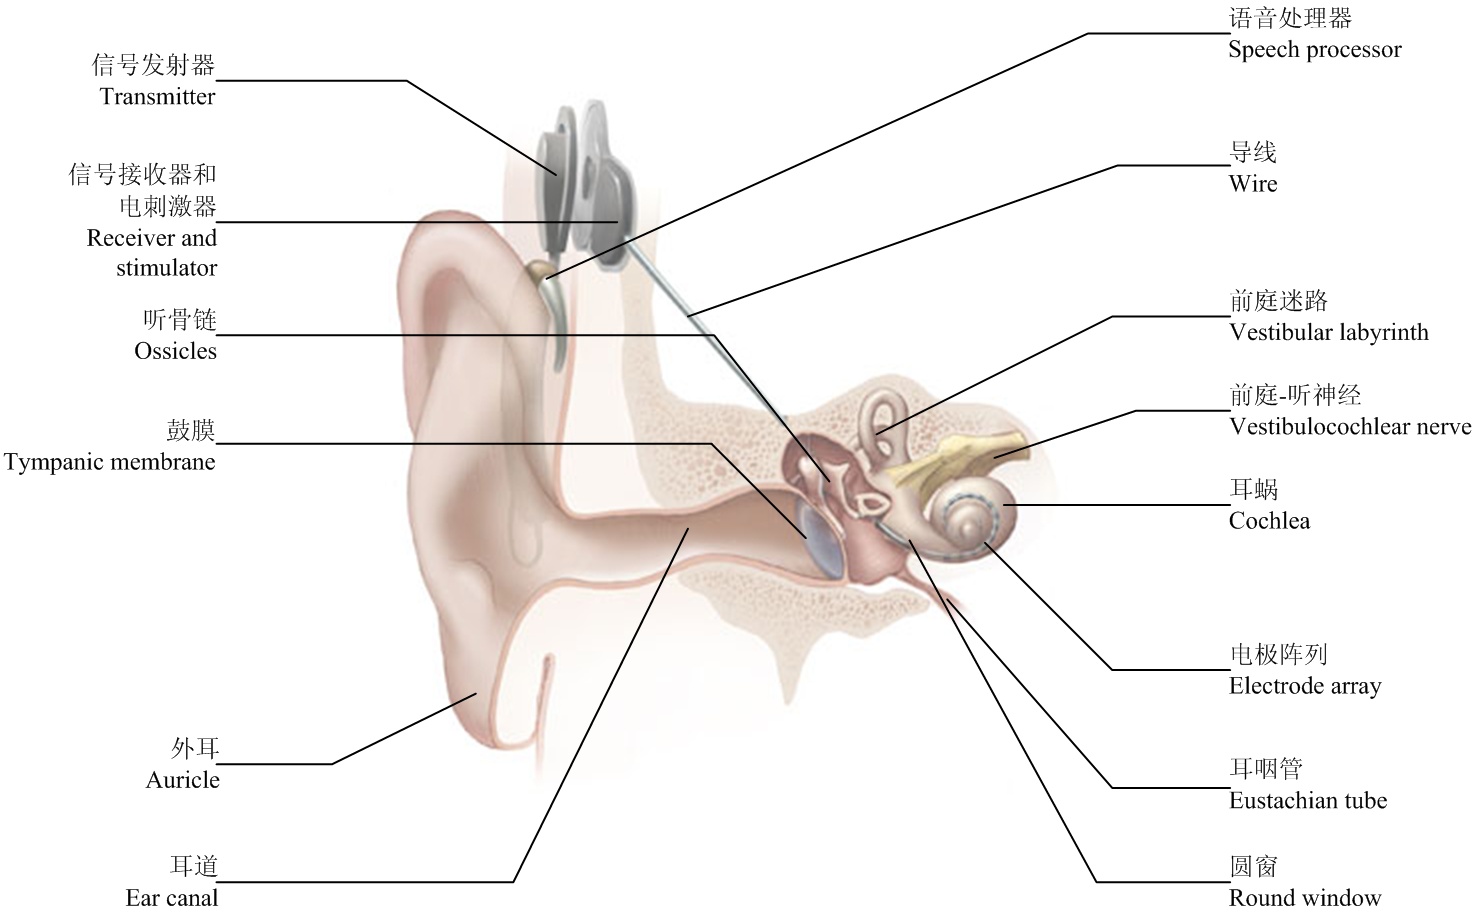 Cochlear implant could improve senior cognition, mood